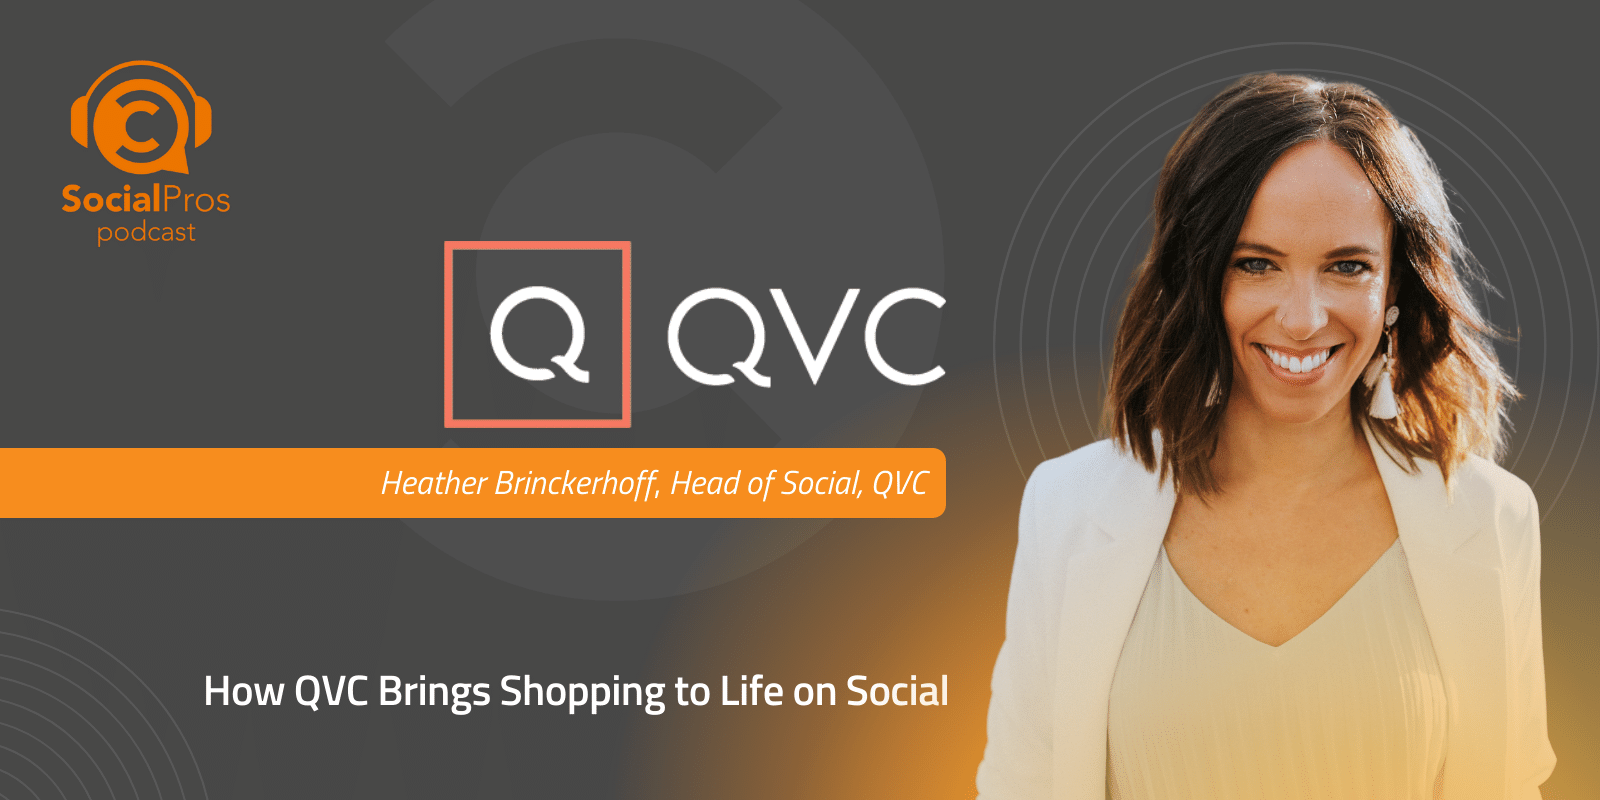 How QVC Brings Shopping to Life on Social